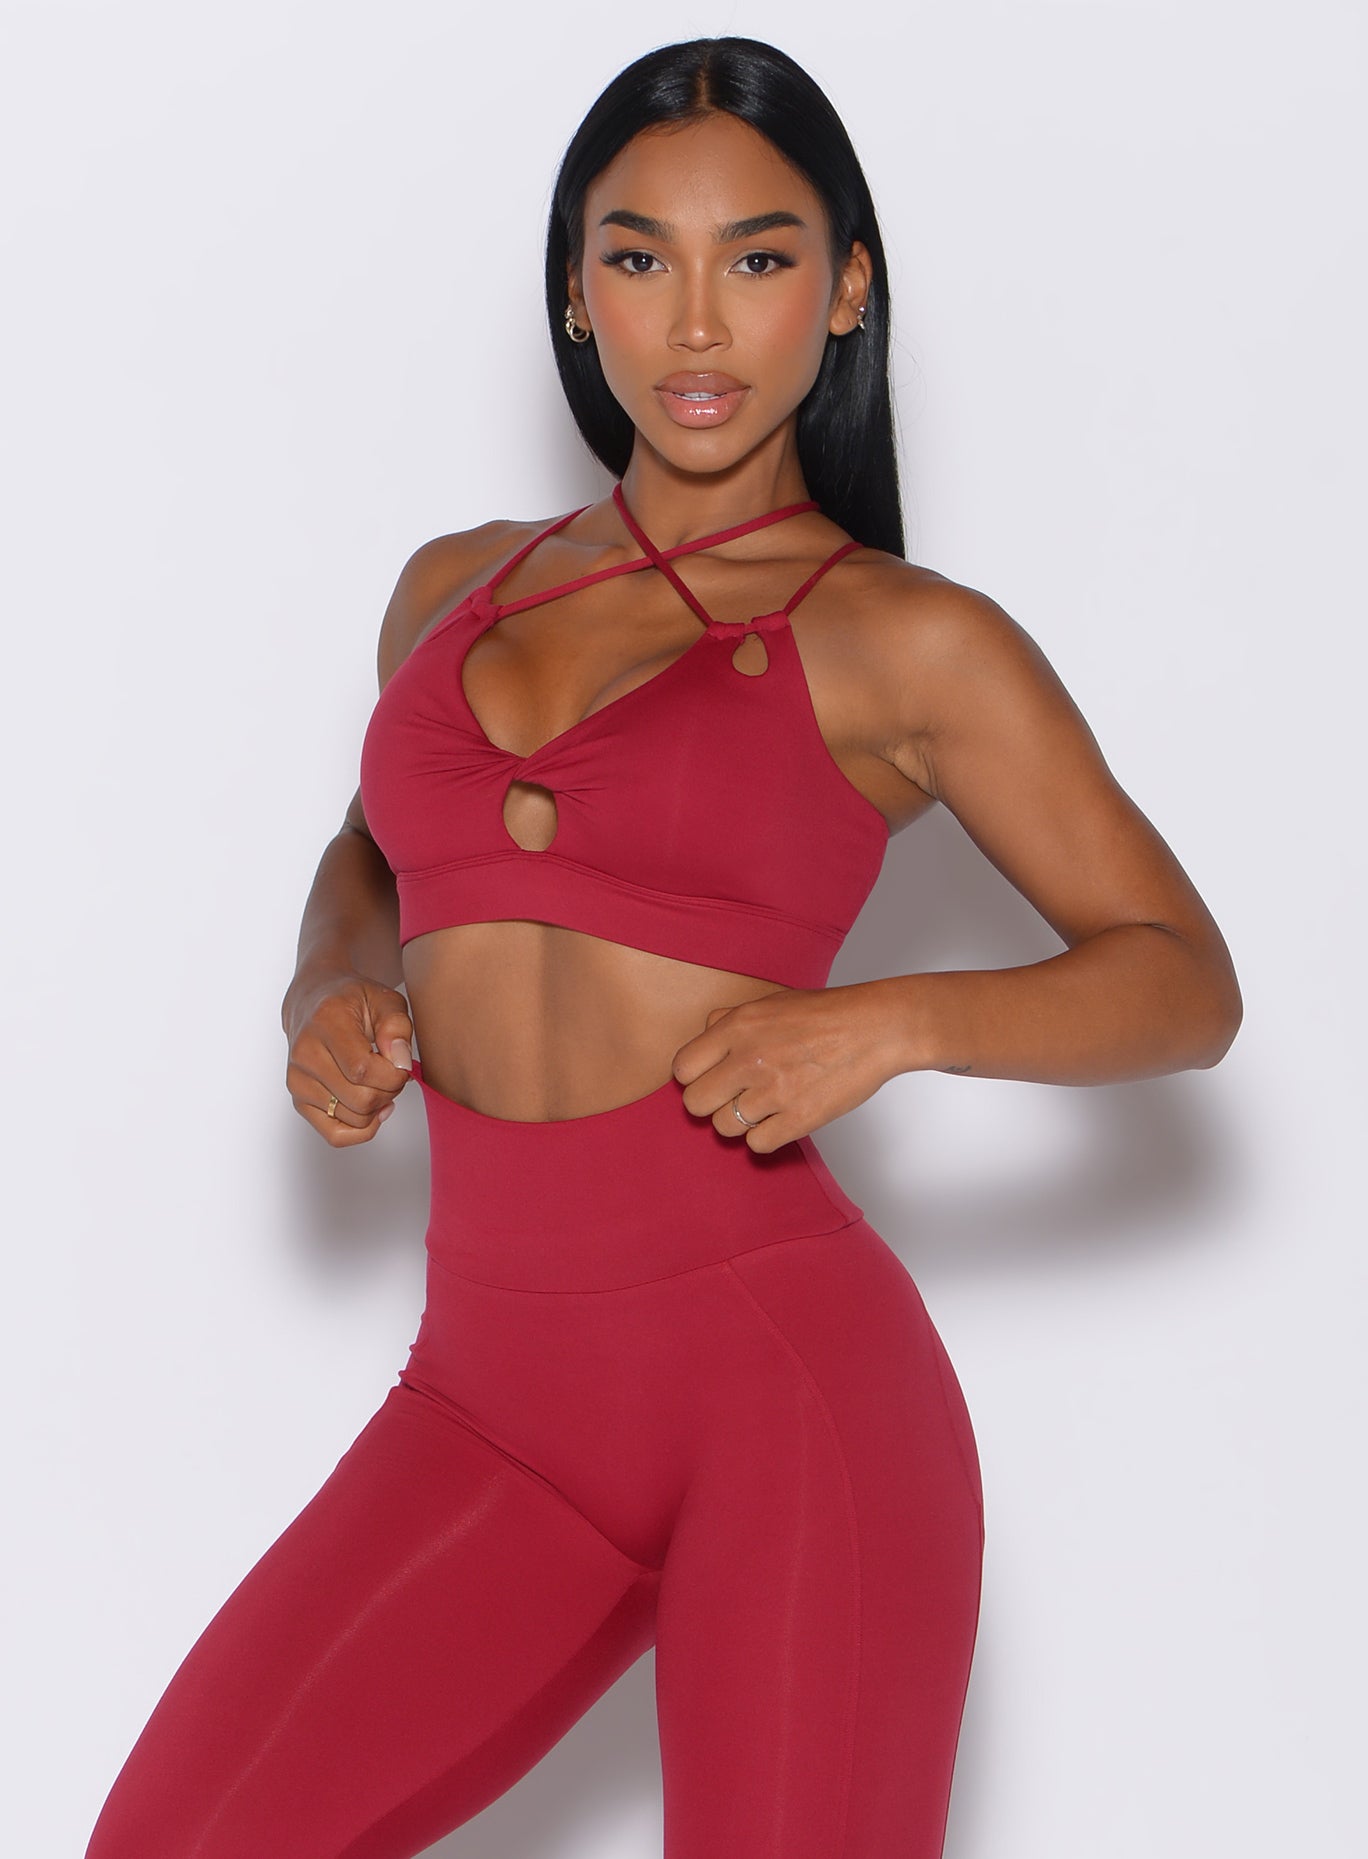 Front profile view of a model wearing our twist sports bra in maroon color along with a matching shape leggings